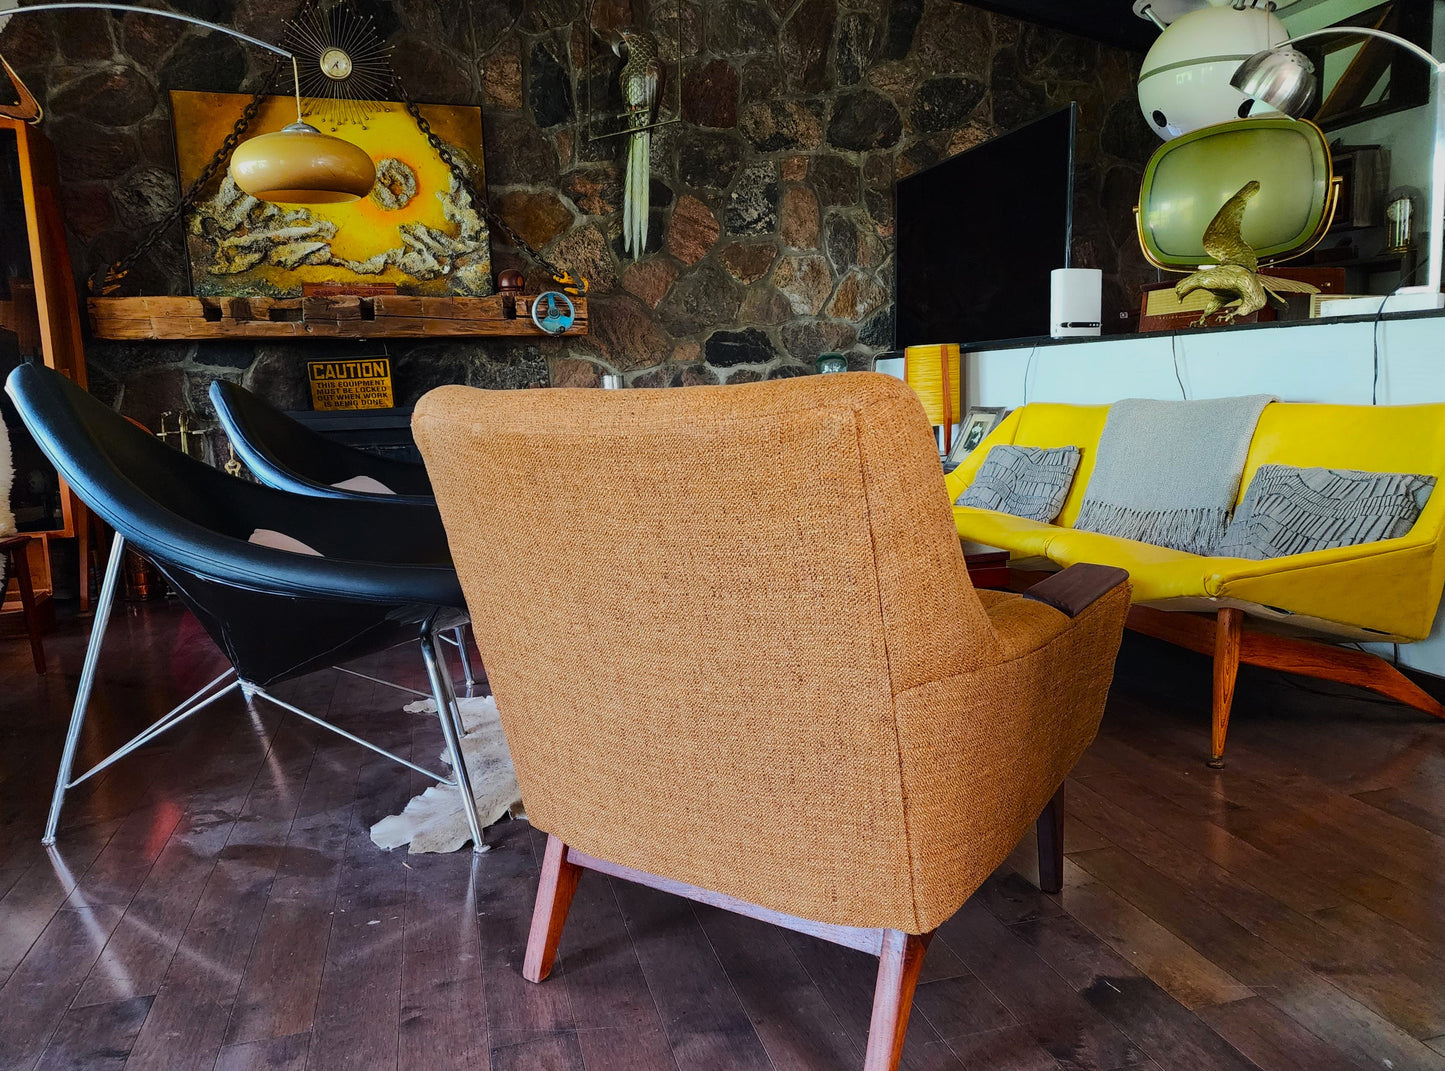 2 REFINISHED REUPHOLSTERED Mid Century Modern Armchairs & Ottoman